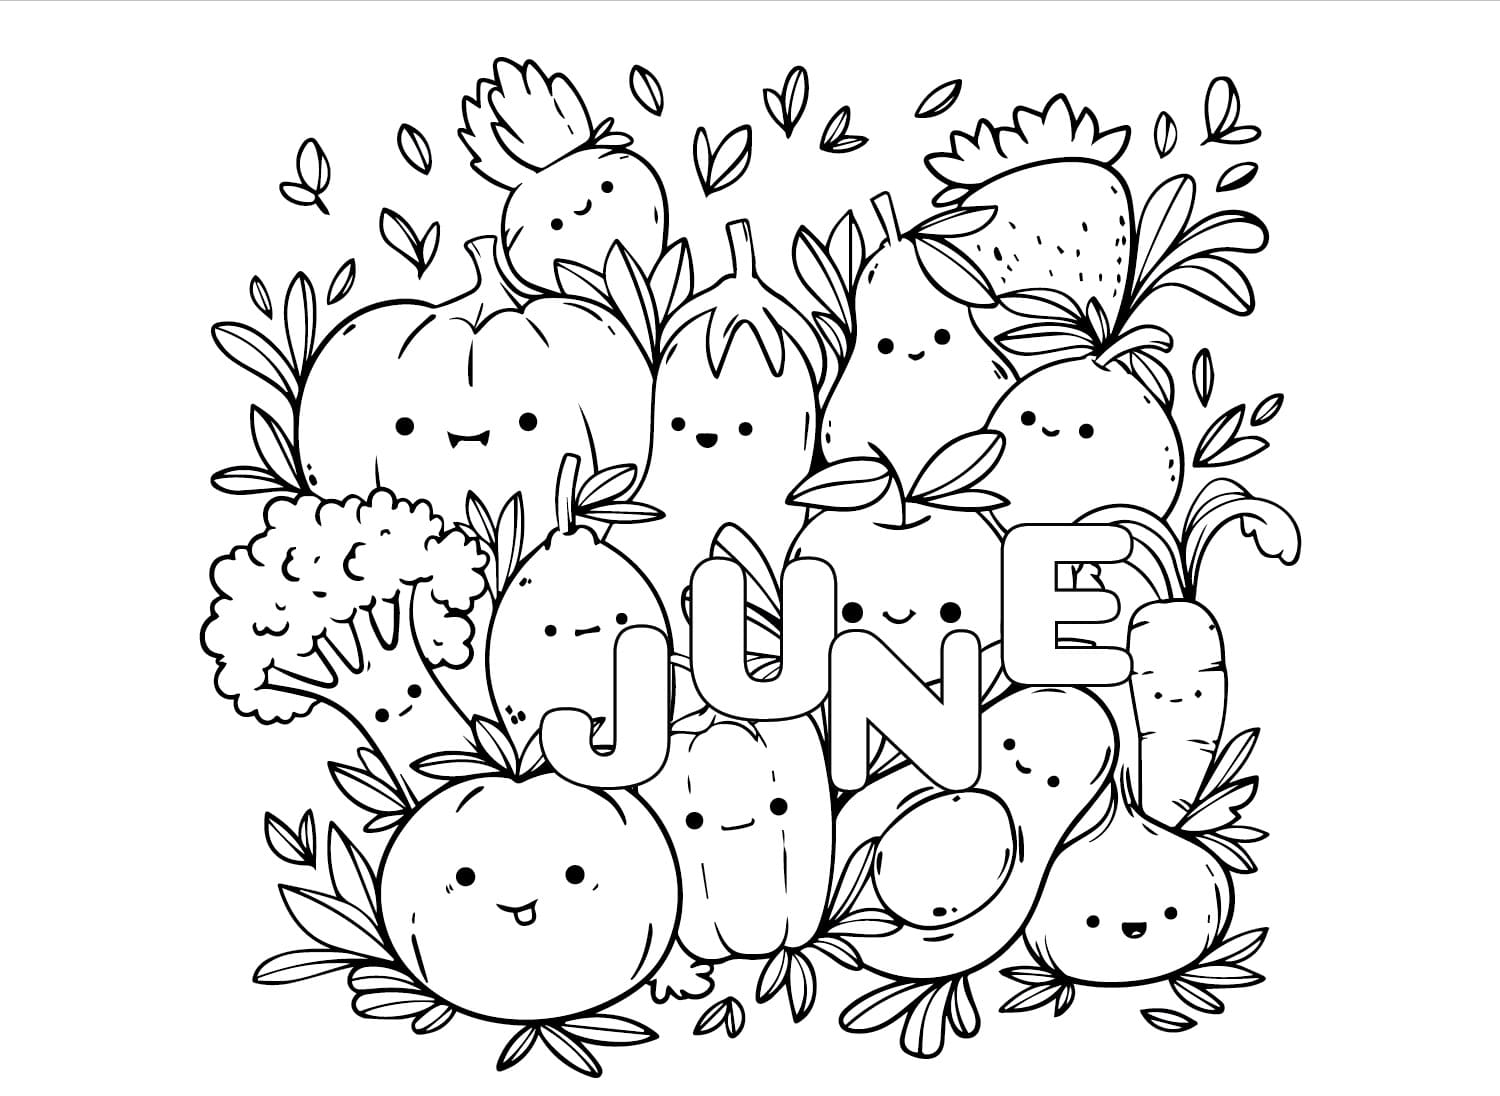 June For Free coloring page - Download, Print or Color Online for Free